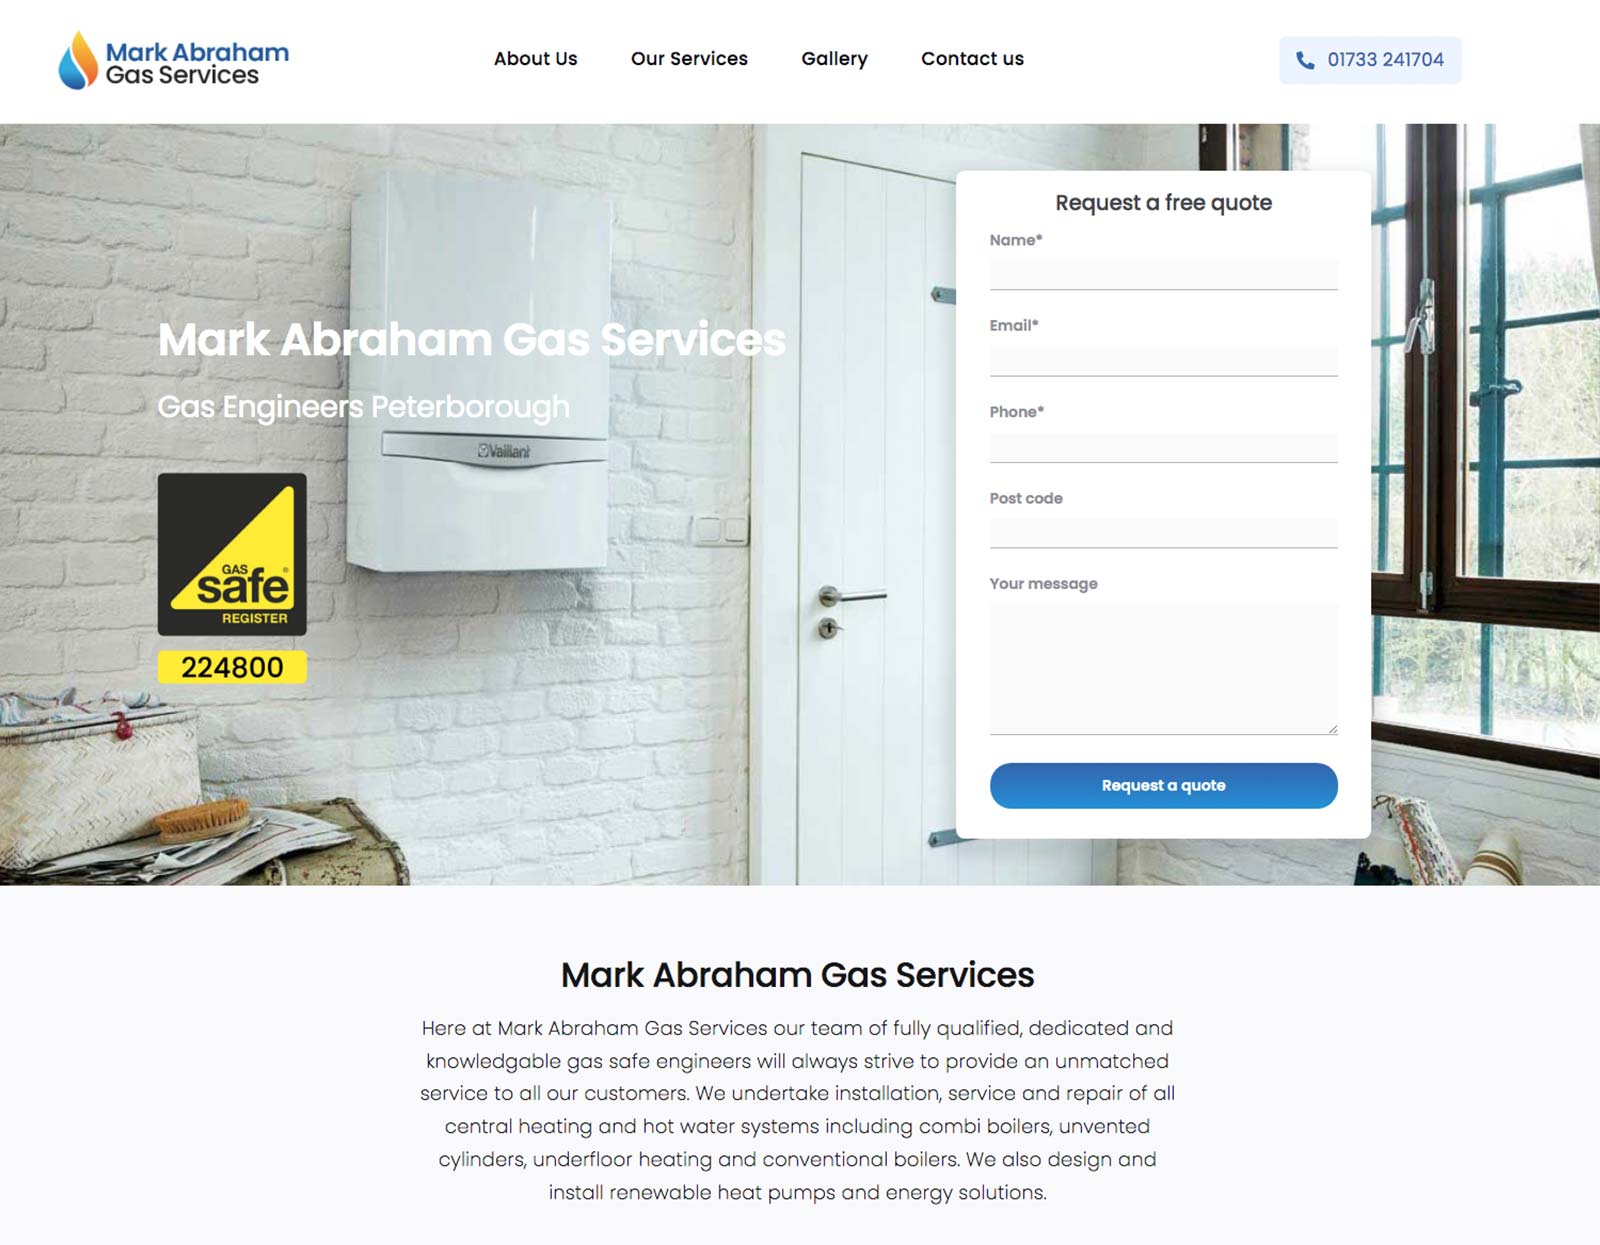 Image of Paul Hailes Design work for Mark Abraham Gas Services website home page.